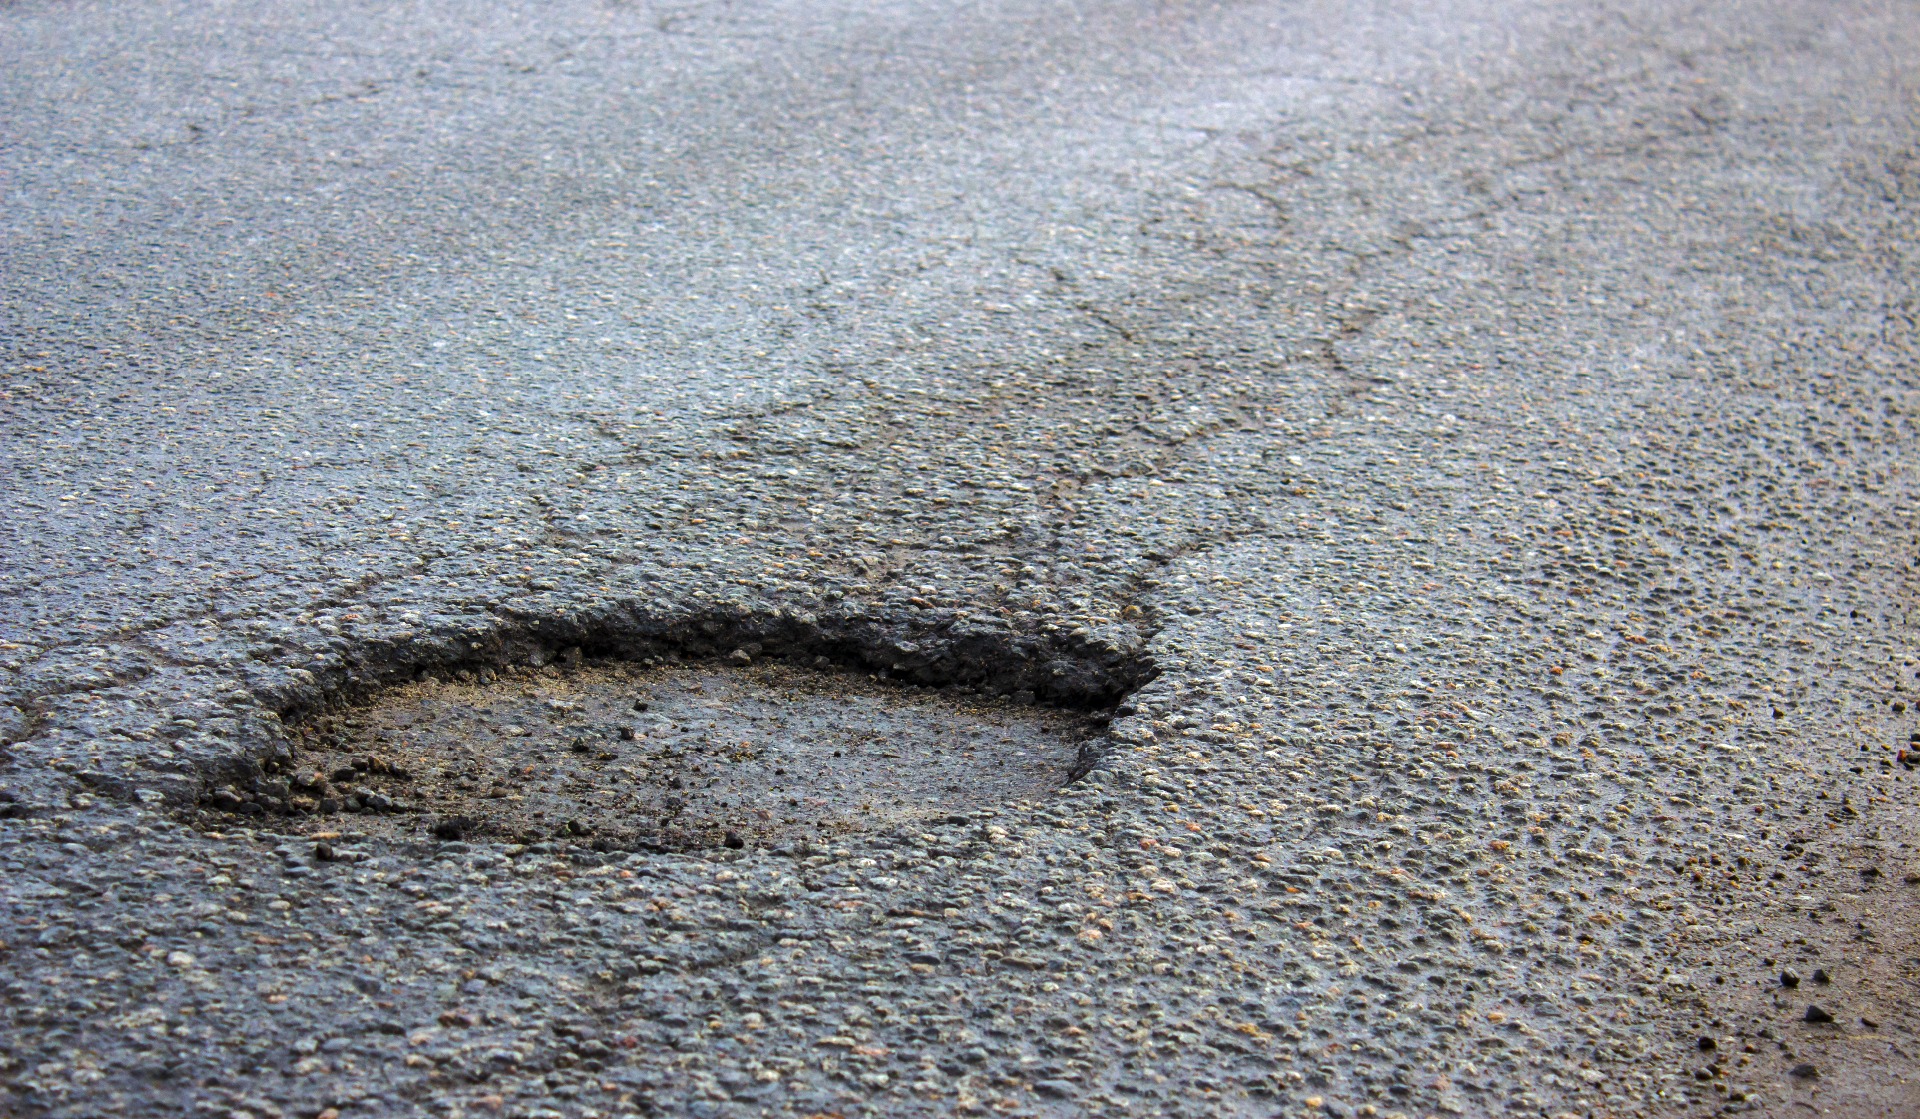 A large pothole in the middle of a road.